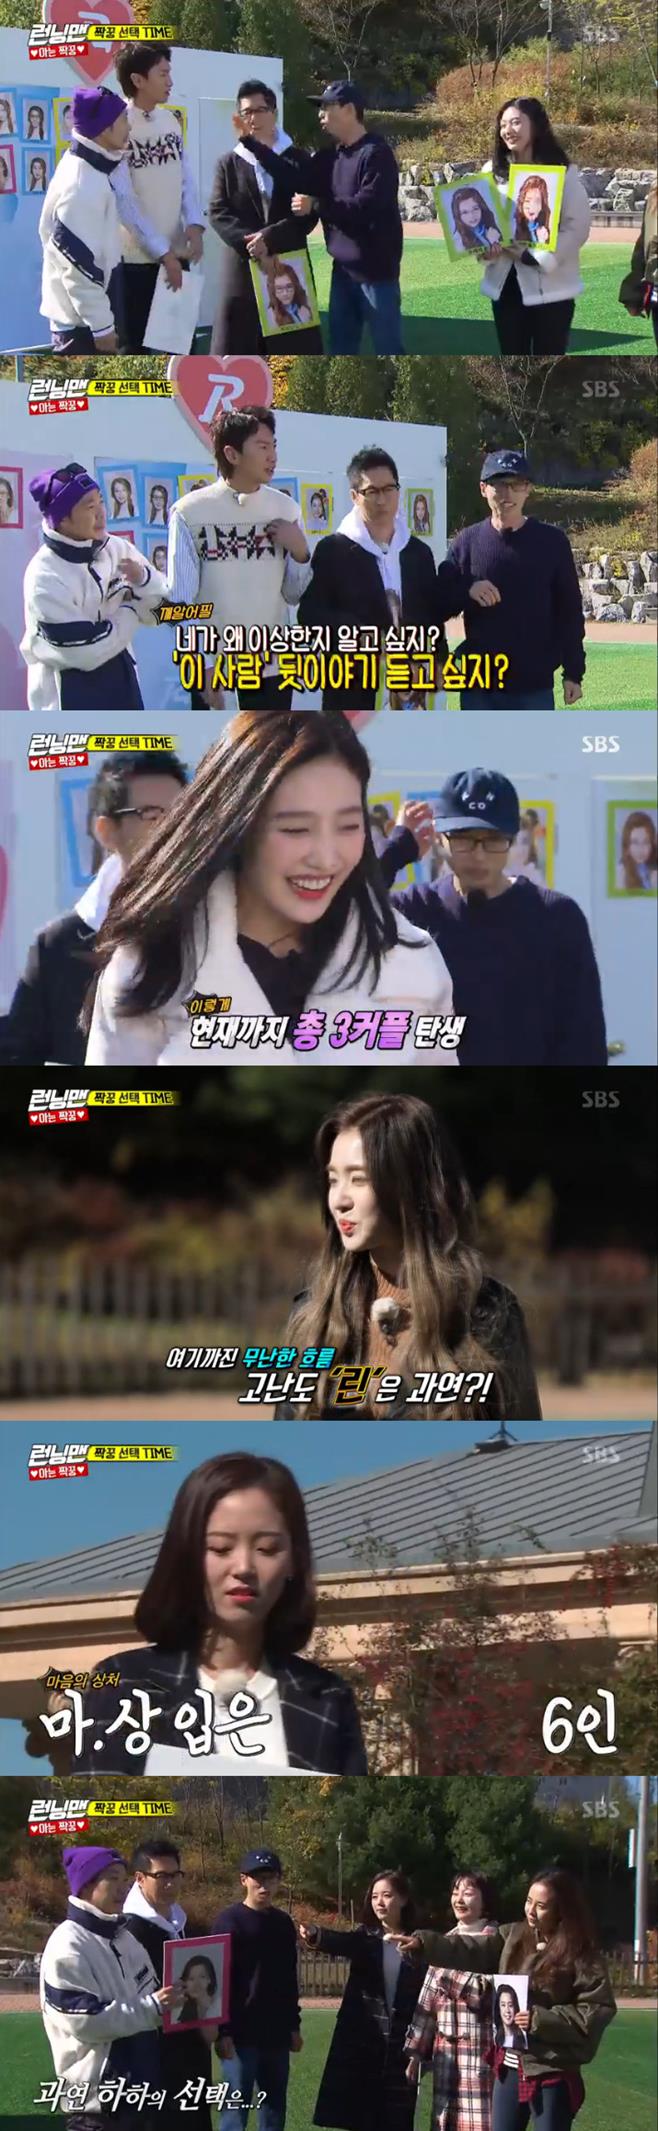 In Running Man, Kang Na, Irene and Joy laughed in the process of choosing a pair.Actor Kang Han Na, group Red Velvet Irene and Joy appeared as guests in the SBS entertainment program Running Man broadcasted on the afternoon of the 18th.On this day, Kang Na, Irene and Joy had a choice time with the members.The members always wanted to pair with the guest, not the former and Song Ji-hyo, and the guests were embarrassed.First, Joy made the choice: Haha did until he fulfilled Joy, who said, Joy is really good, this is him, angering him.I know too well that you have a family, Joy said, angering Haha.But Joy eventually chose the familiar Lee Kwang-soo, who shouted Im sorry to Lee Kwang-soo, Why did you do that?Irene also had a charm appealing to her by name-sam-haeng, but the word Lin was difficult and she was not able to do it properly, and Irenes troubles deepened.In the end, Irene shouted the name of the boiler and chose Yang Chan, who laughed, to cheer him.The last time he was desperate, he chose Haha, who had been a partner, and he laughed when he asked him to show his poetry.Hahaha and laughed to satisfy Haha. Haha chose strong me, and strong me cheered.